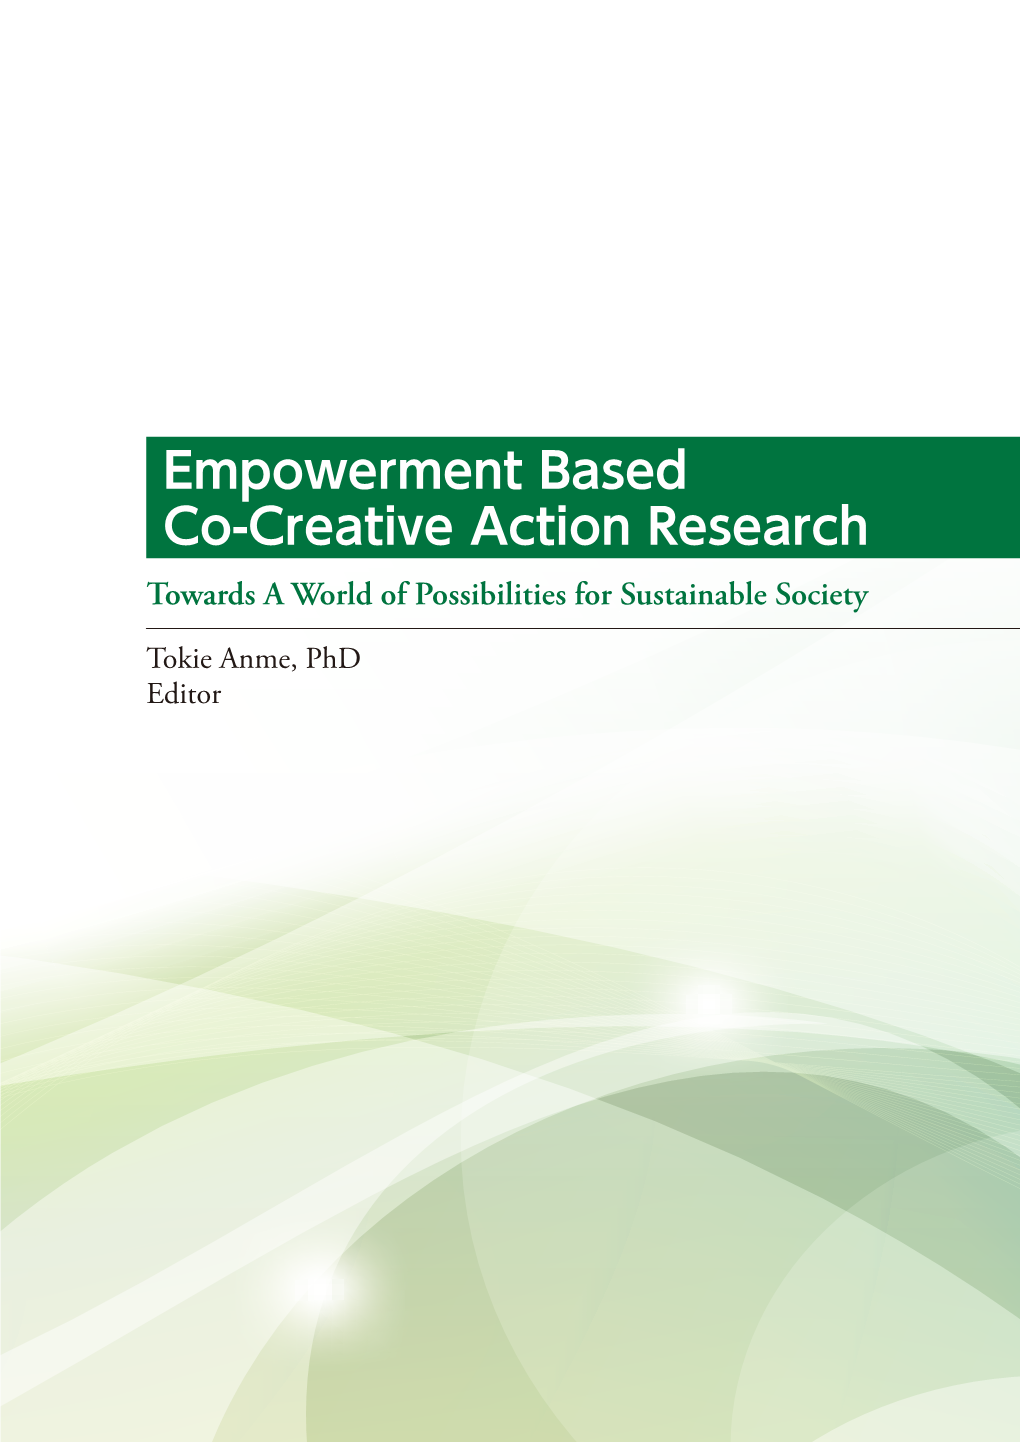 Empowerment Based Co-Creative Action Research